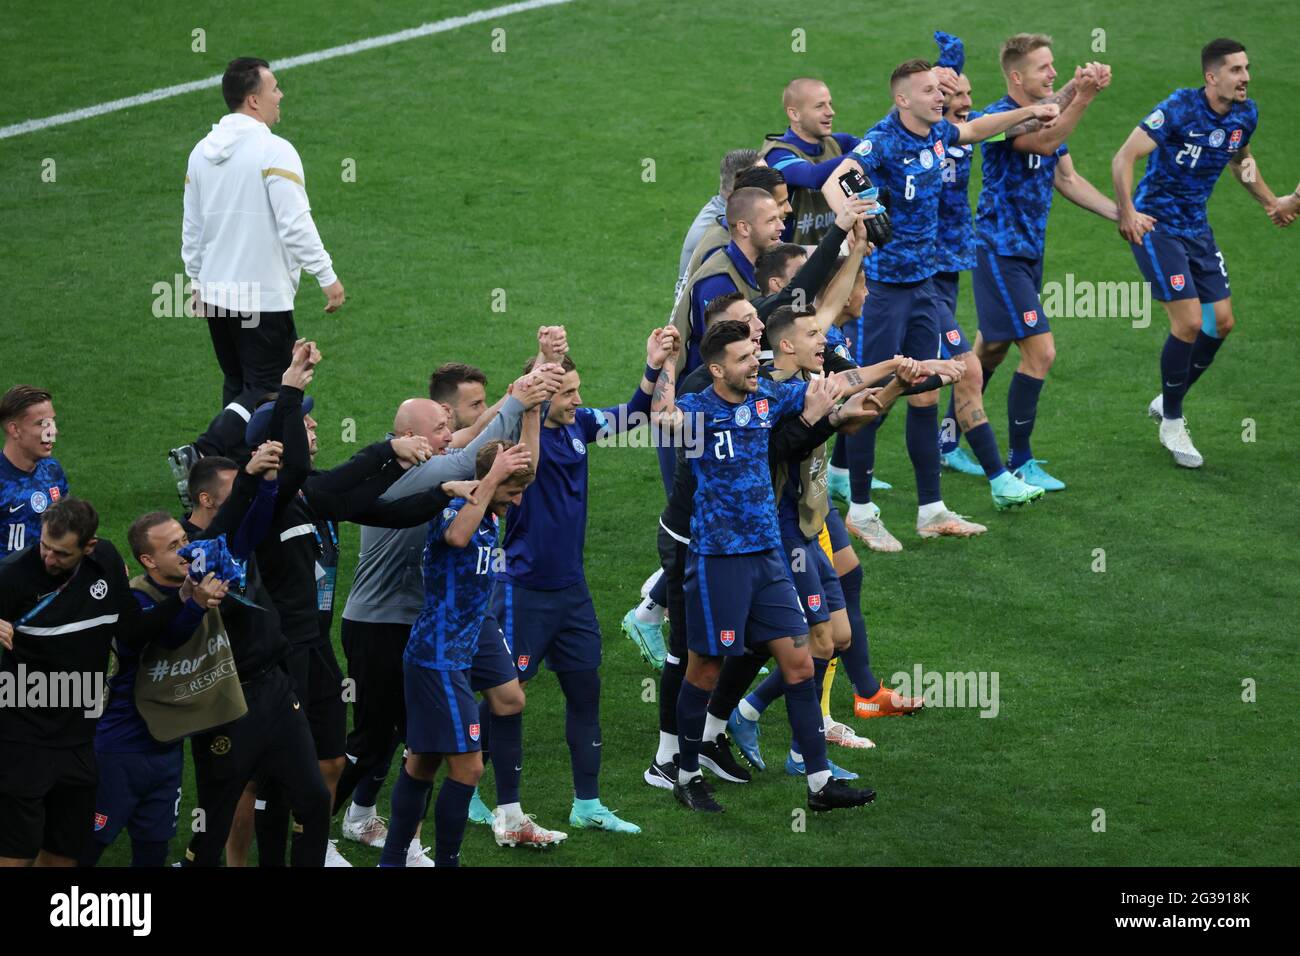 Saint Petersburg, Russia. 14th June, 2021. Ondrej Duda (8), Robert Mak (20), Milan Skriniar (14) of Slovakia with their teammates are seen during the European championship EURO 2020 between Poland and Slovakia at Gazprom Arena.(Final Score; Poland 1:2 Slovakia). Credit: SOPA Images Limited/Alamy Live News Stock Photo